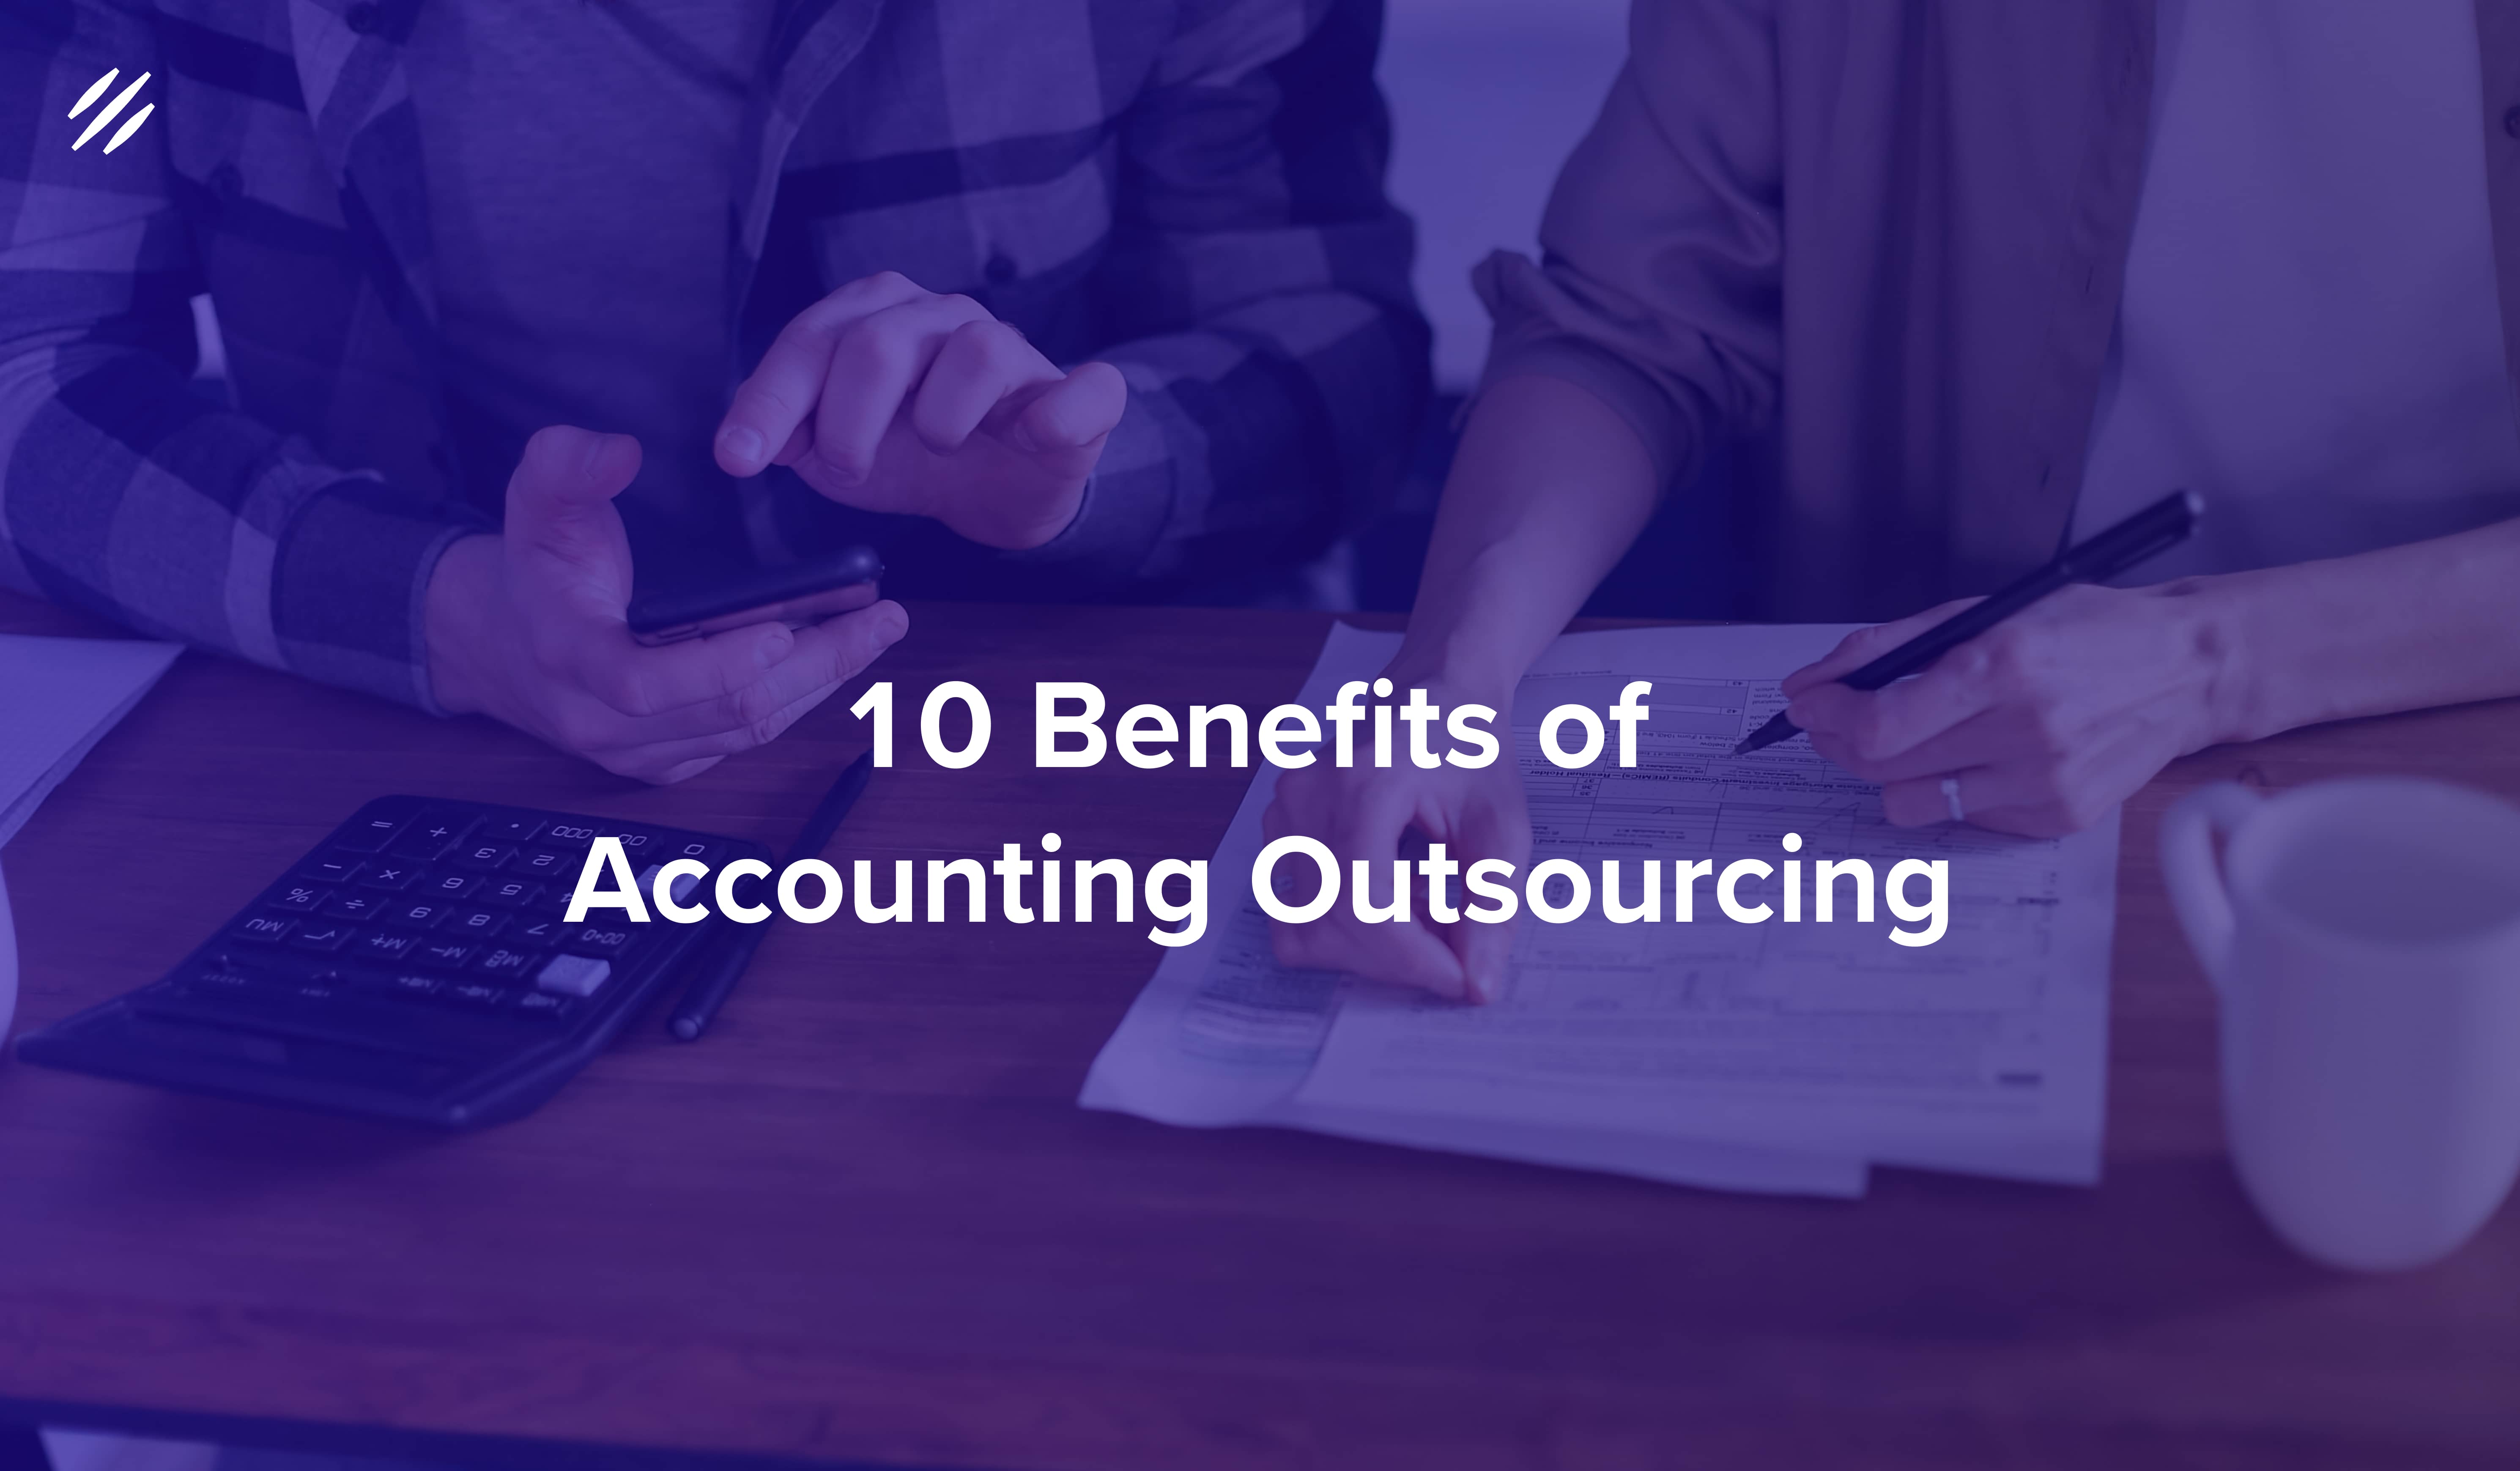 10 Benefits of Accounting Outsourcing